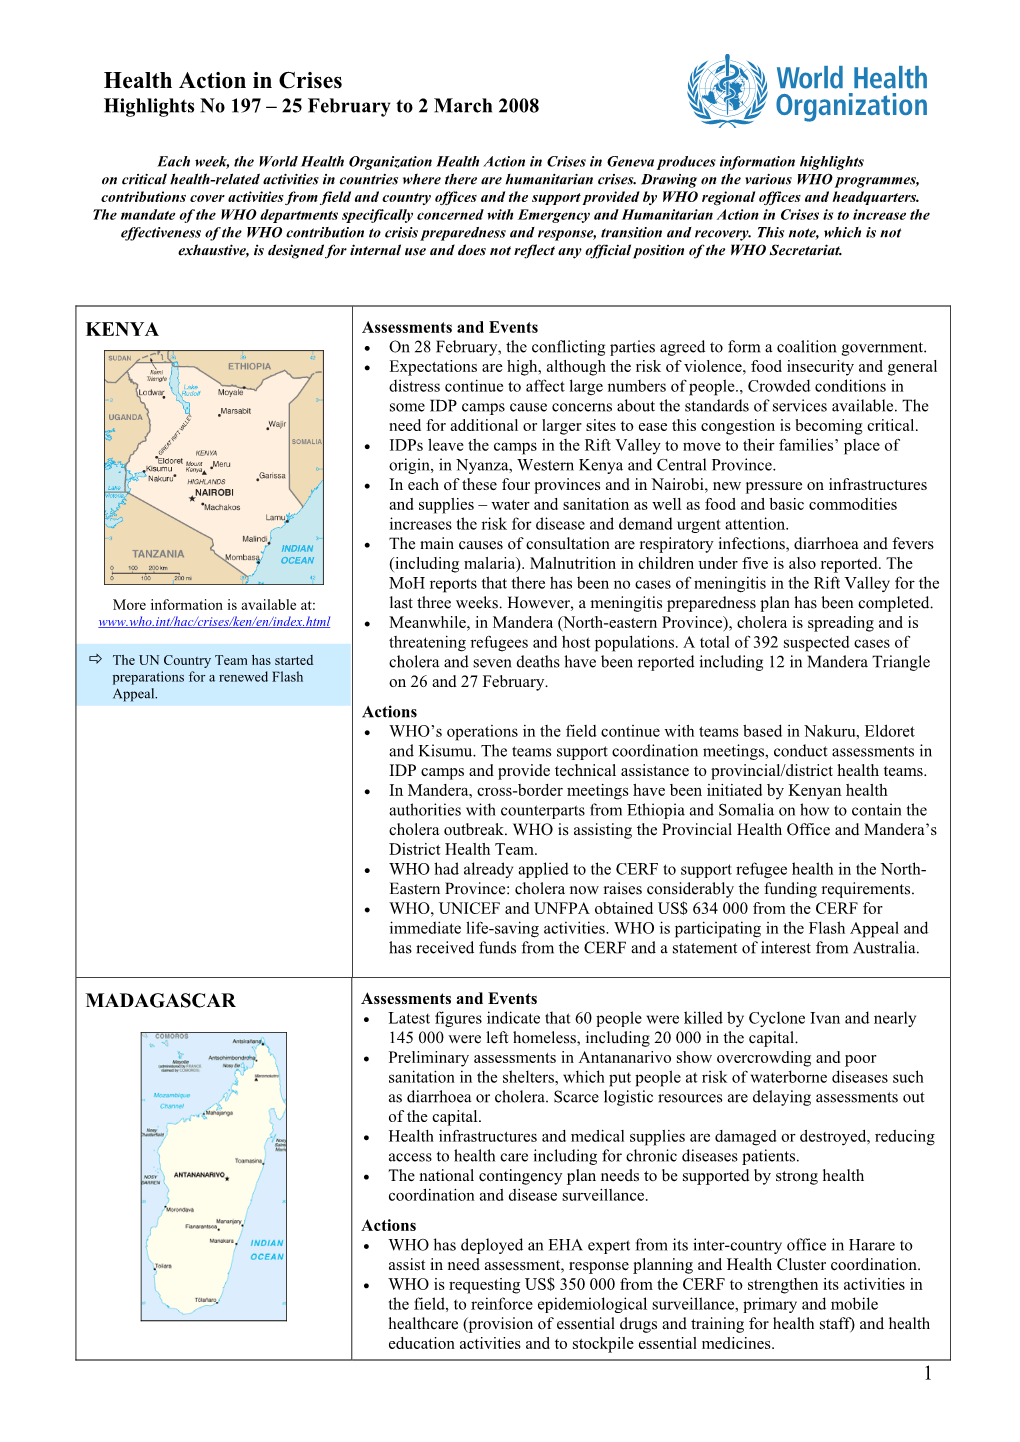 Health Action in Crises Highlights No 197 – 25 February to 2 March 2008